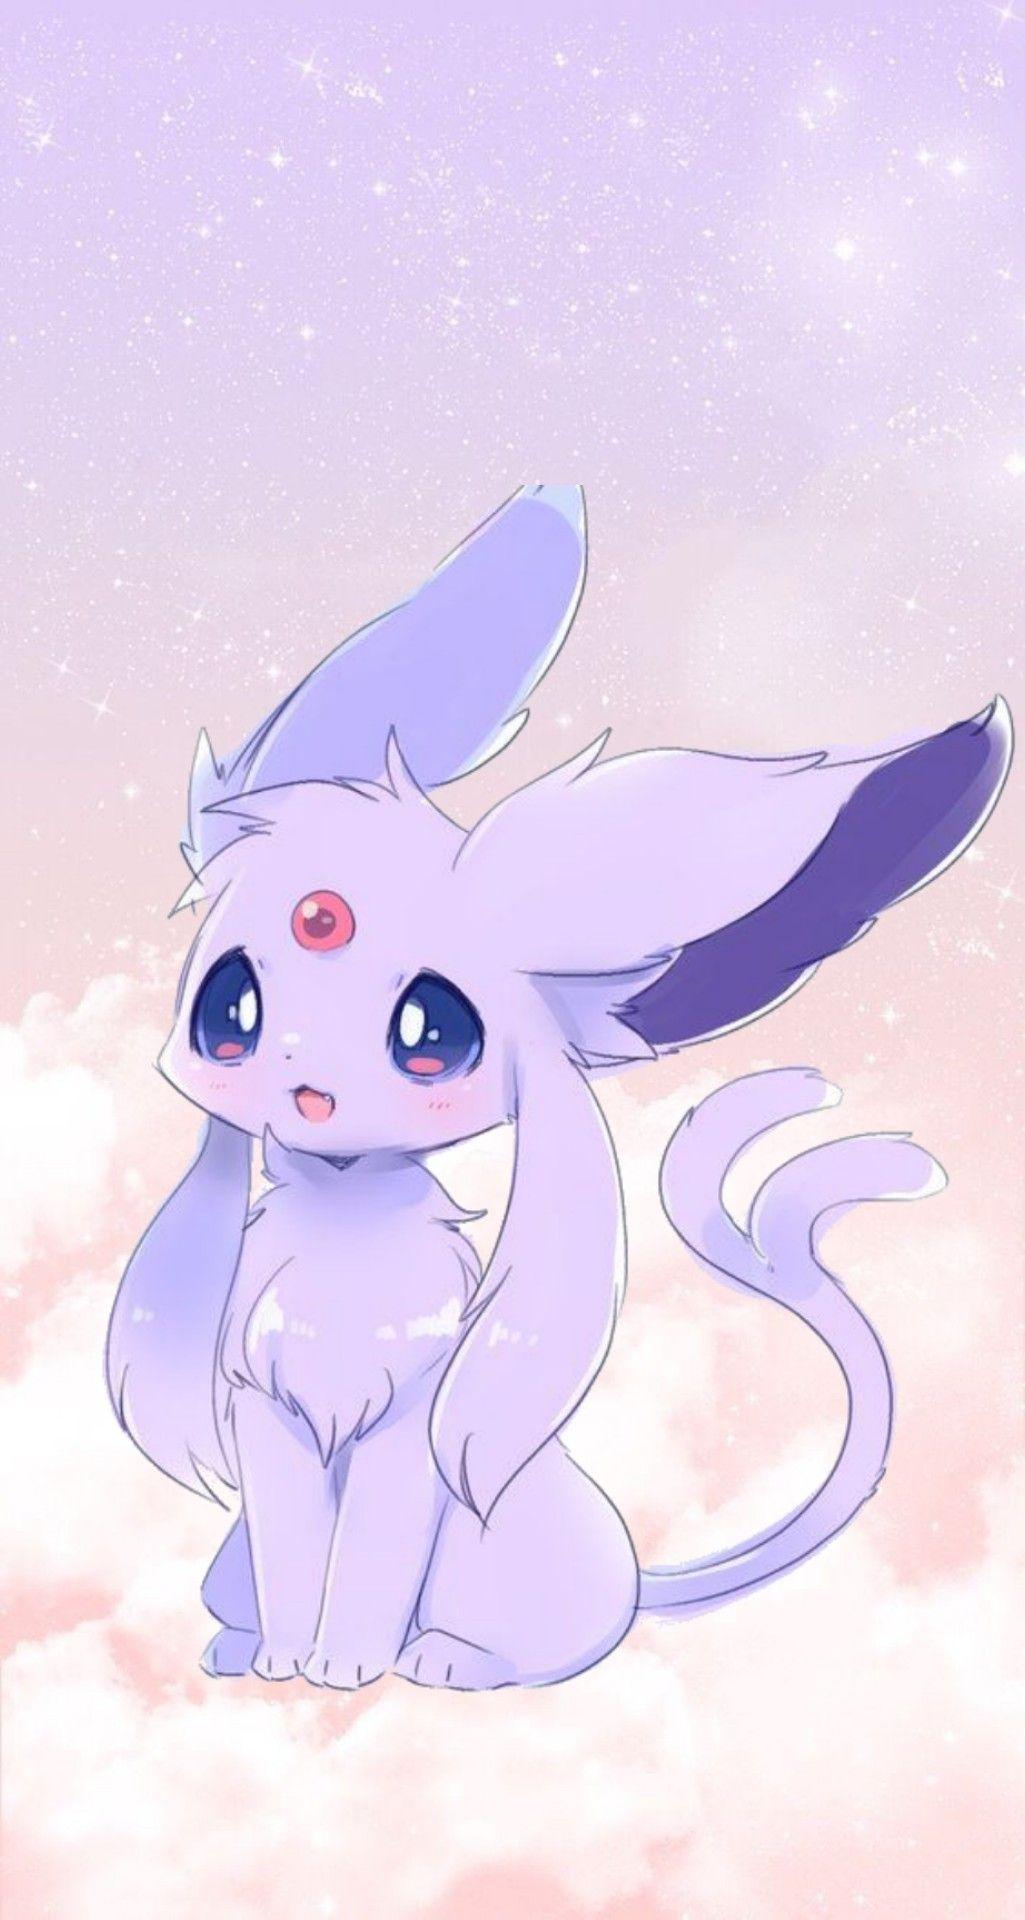 Cute Espeon Wallpapers - Top Free Cute Espeon Backgrounds ...